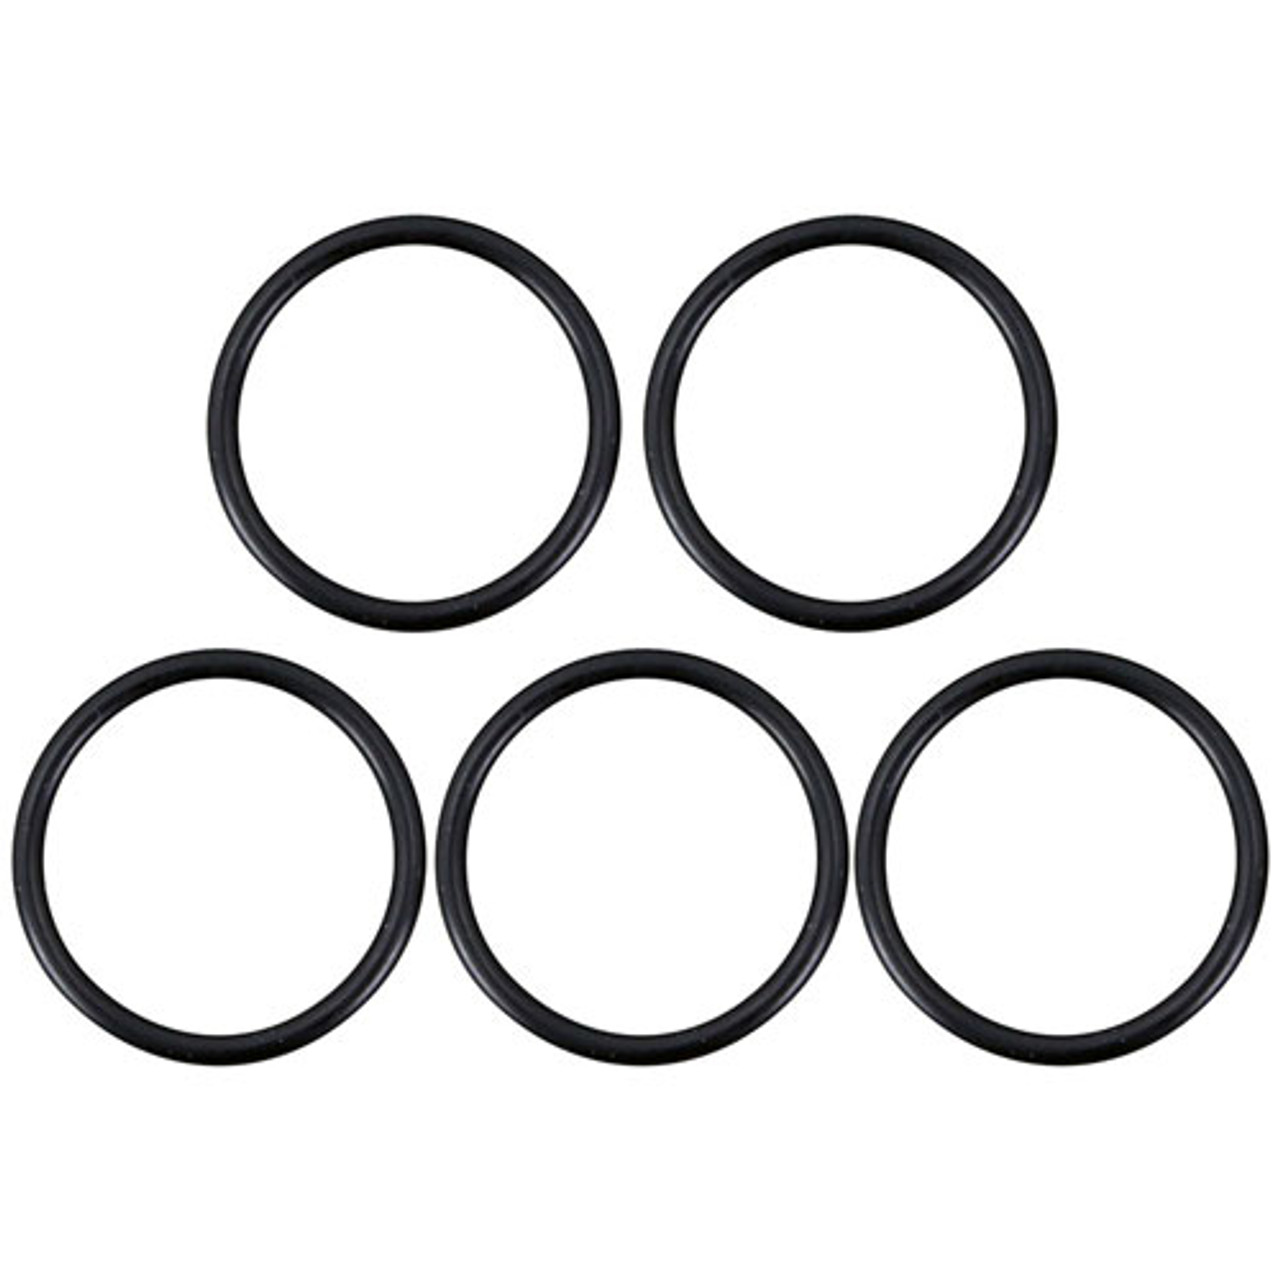 O-Ring - Pump (5/Pkg) - Replacement Part For Frymaster FM8160012